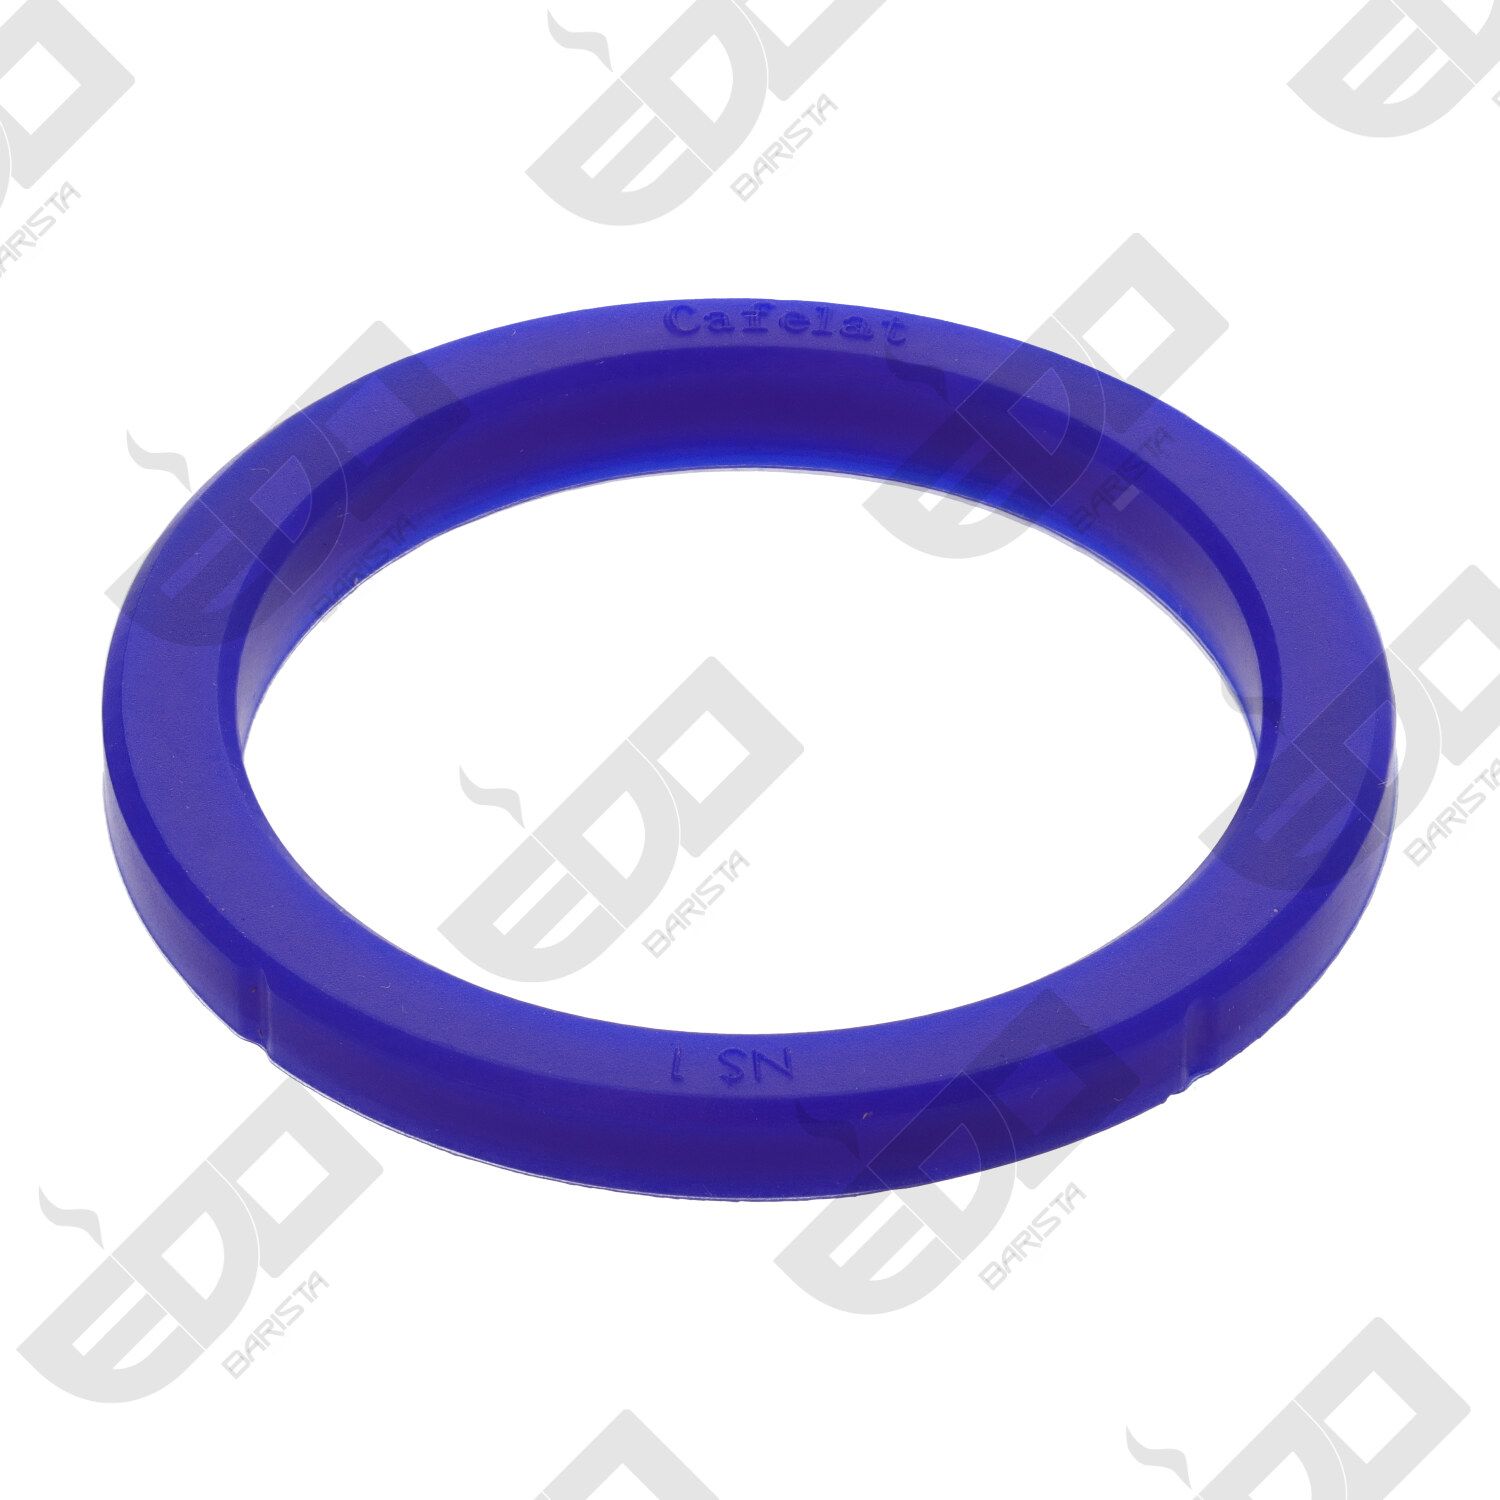 BLUE SILICON GASKET 9mm 